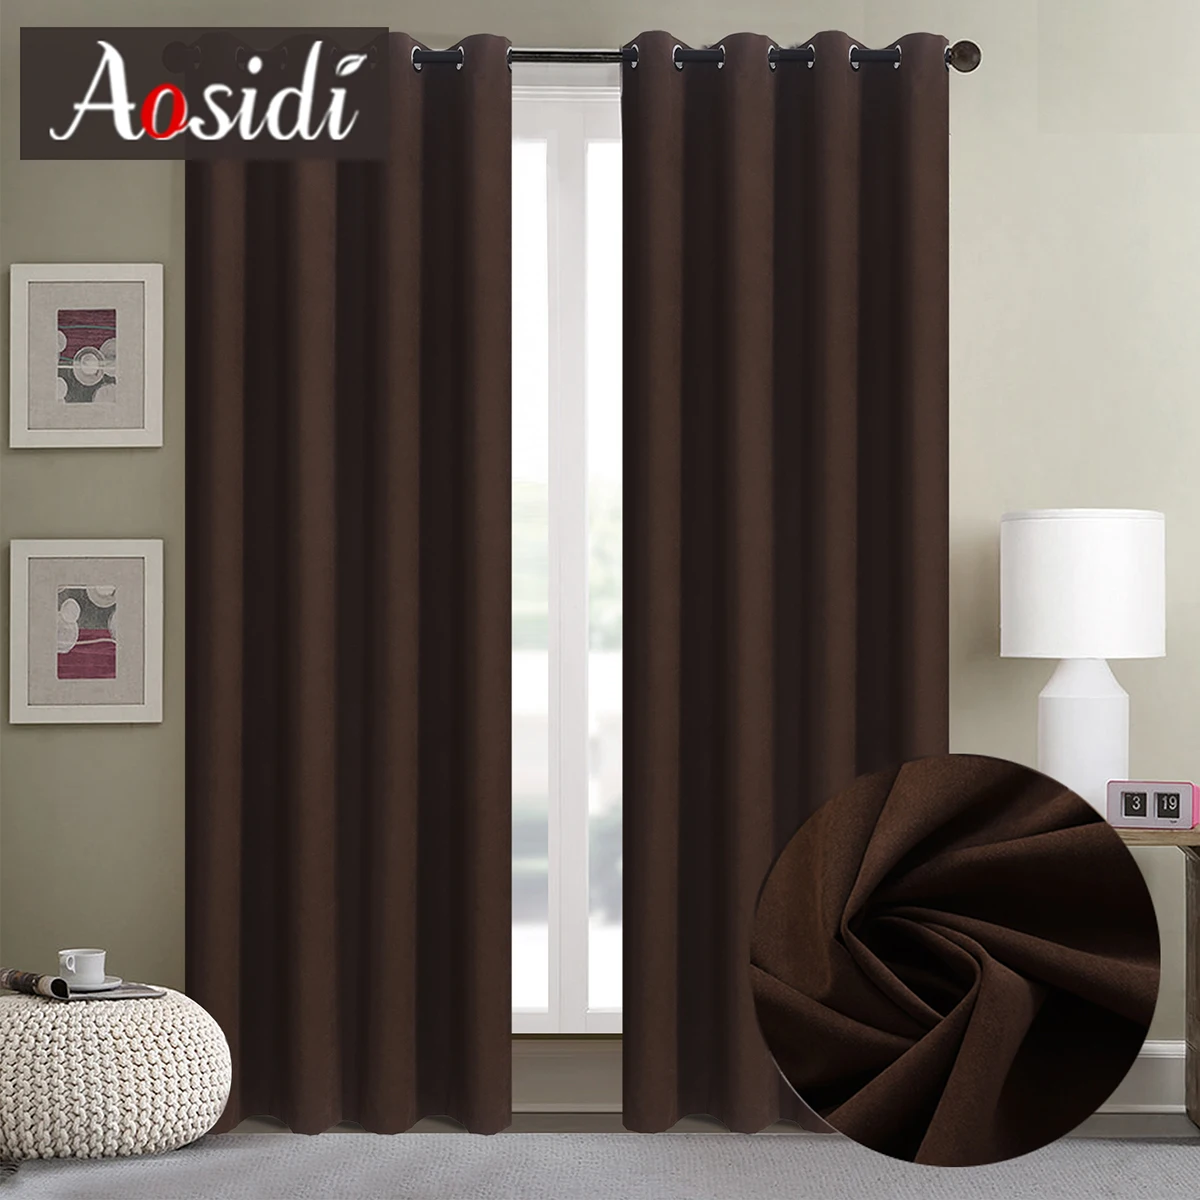 Solid Color Blackout Curtains Bedroom Living Room Modern Curtain Shading Curtain 